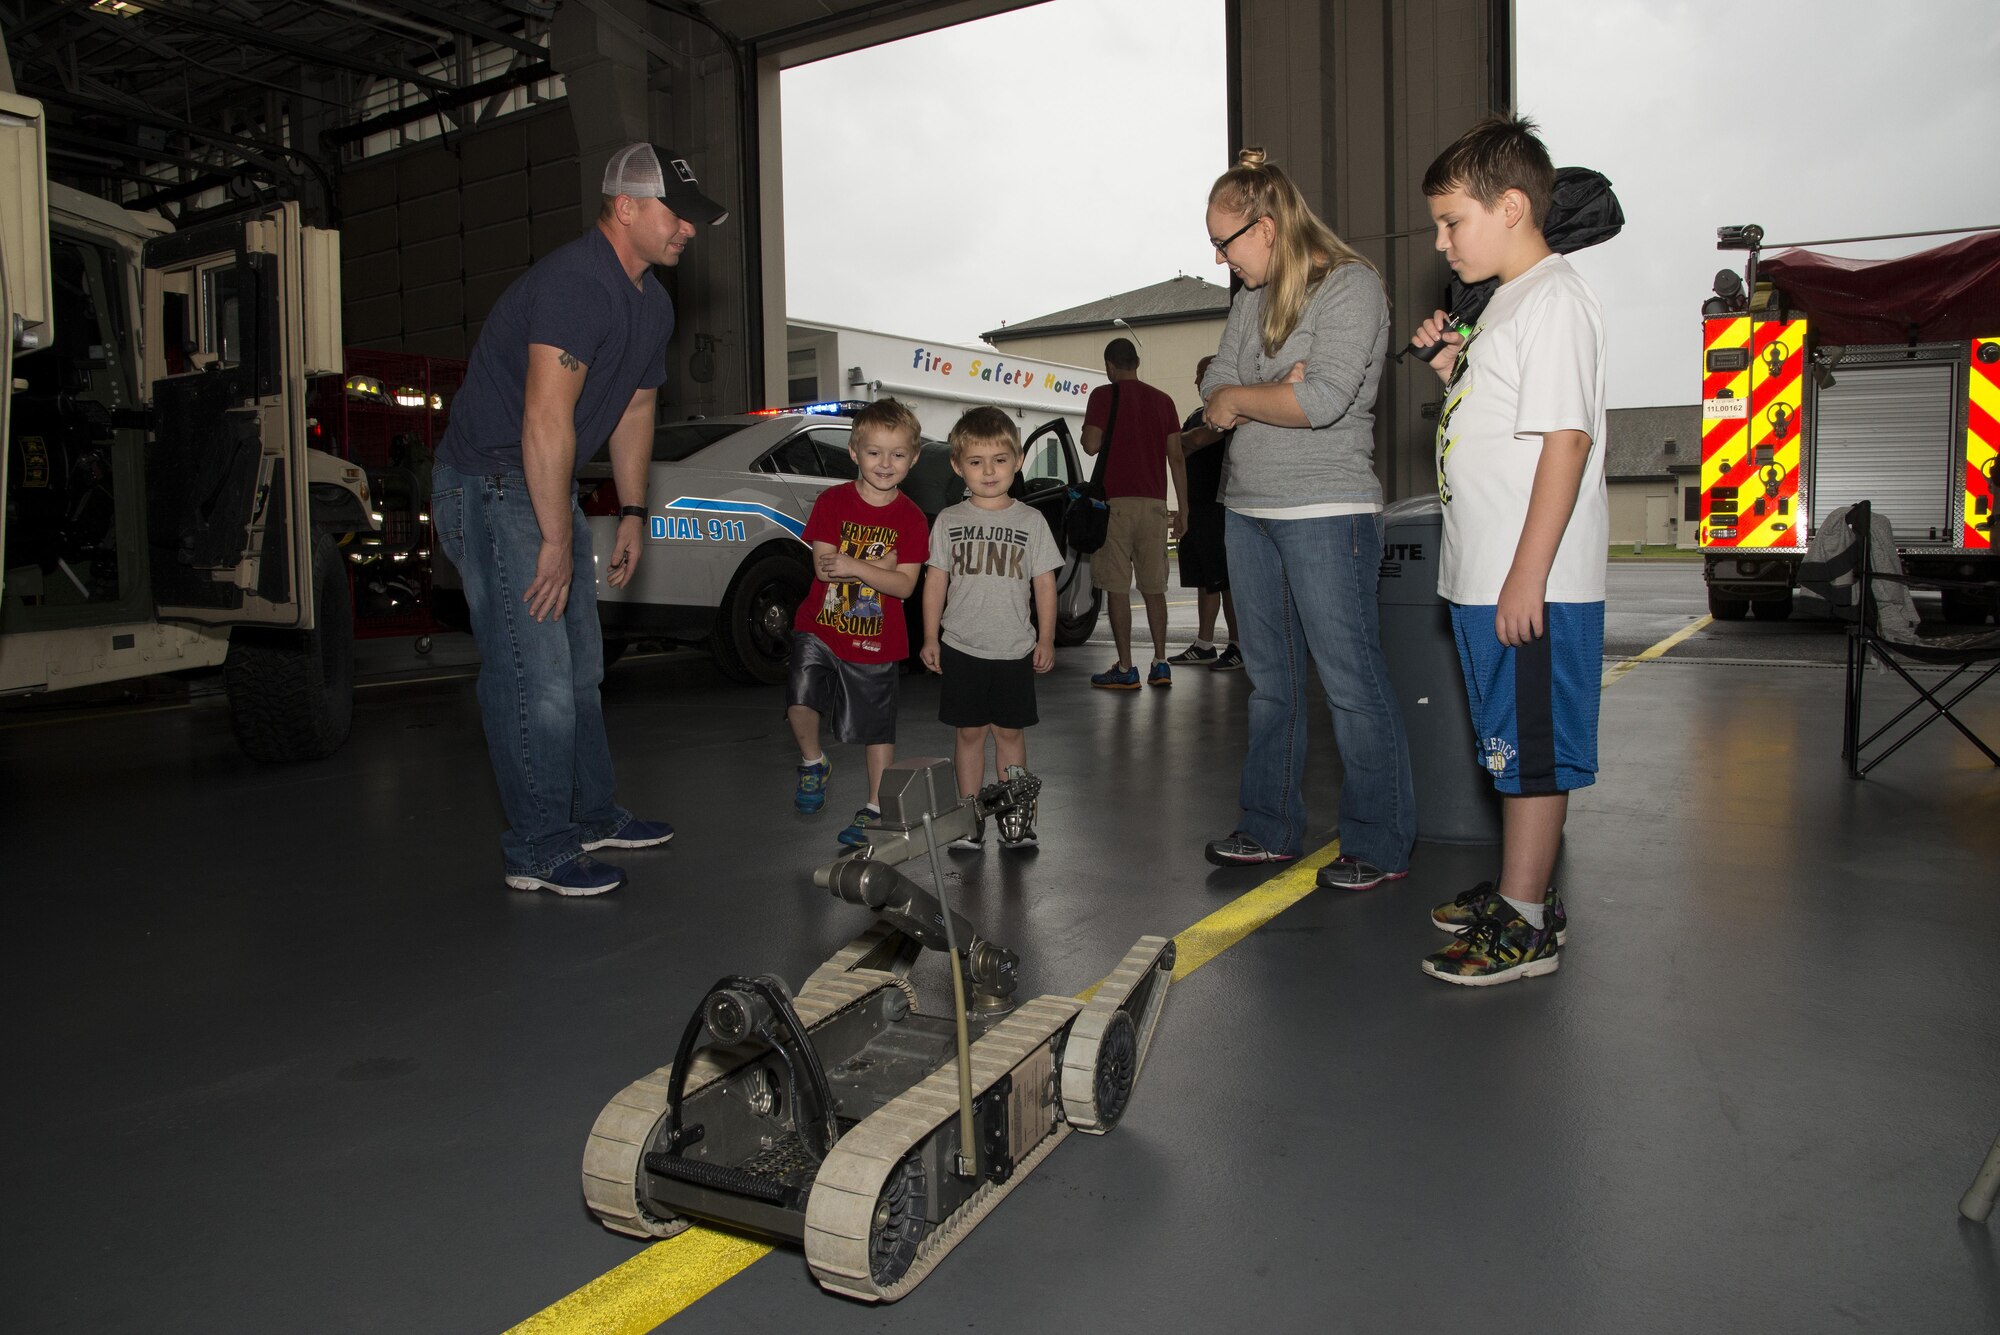 Attendees of the Dover Air Force Base First Responders’ Special Needs Day watch a demonstration of a 436th Civil Engineer Squadron Explosive Ordnance Disposal robot Oct. 8, 2016, at the 436th CES Fire Department on Dover AFB, Del. More than 25 members of Team Dover attended the event where they were able to interact with emergency responders, vehicles and equipment. (U.S. Air Force photo by Senior Airman Aaron J. Jenne)